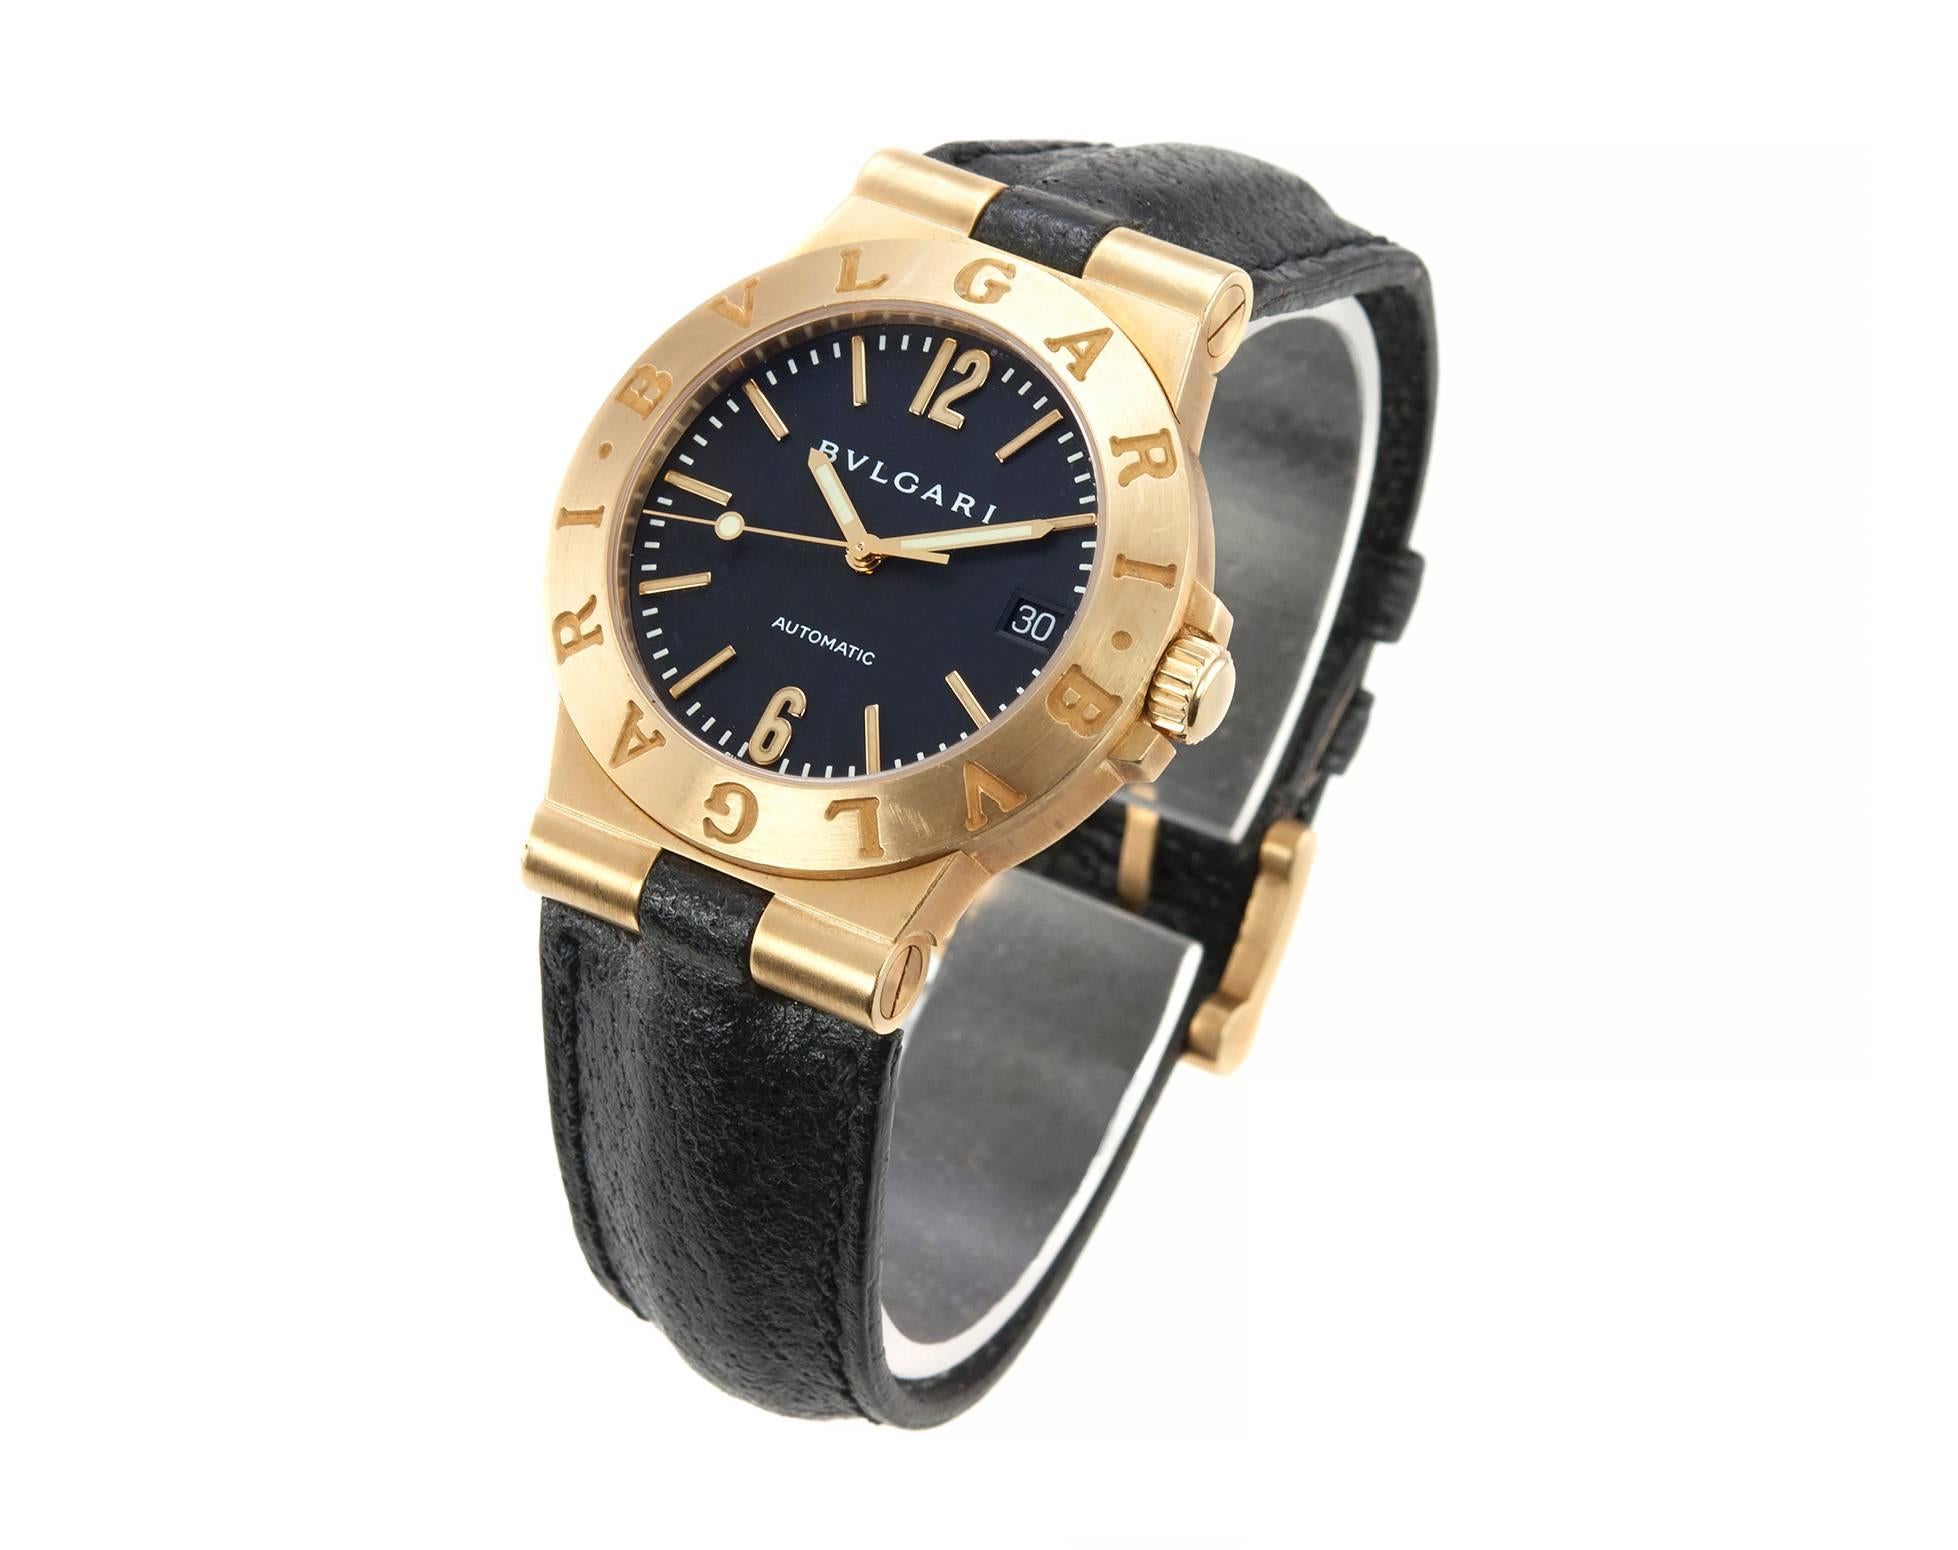 Bulgari Diagono wristwatch in 18 karat yellow gold, reference LCV 35 G. This modern 35mm size watch features a black original dial, glass crystal, original black strap, 18 karat yellow gold case, original 18 karat gold buckle, automatic movement. 